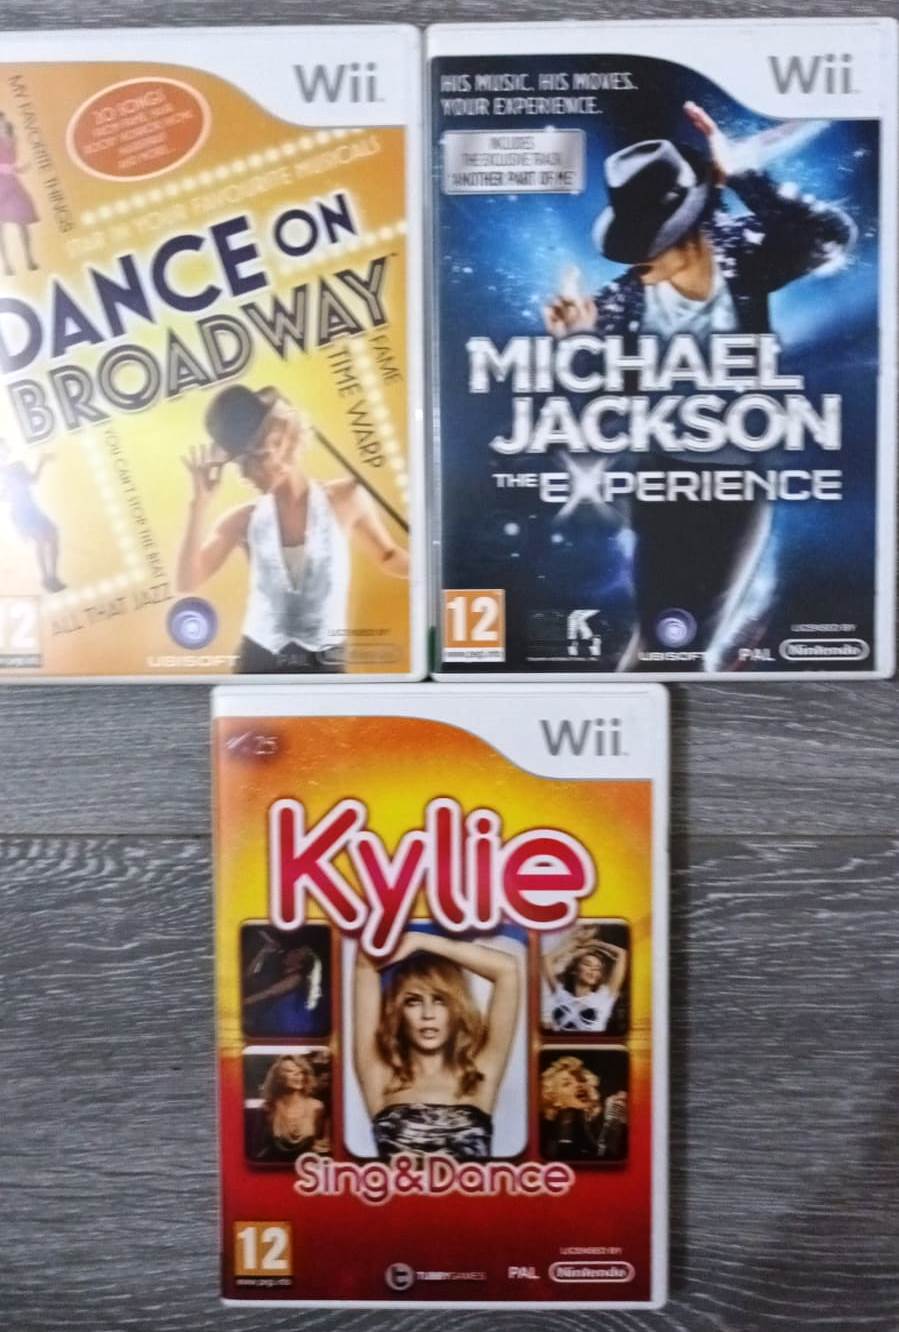 Joc Nintendo Wii Dance on Broadway + Kylie Sing and Dance + Michael Jackson The Experience